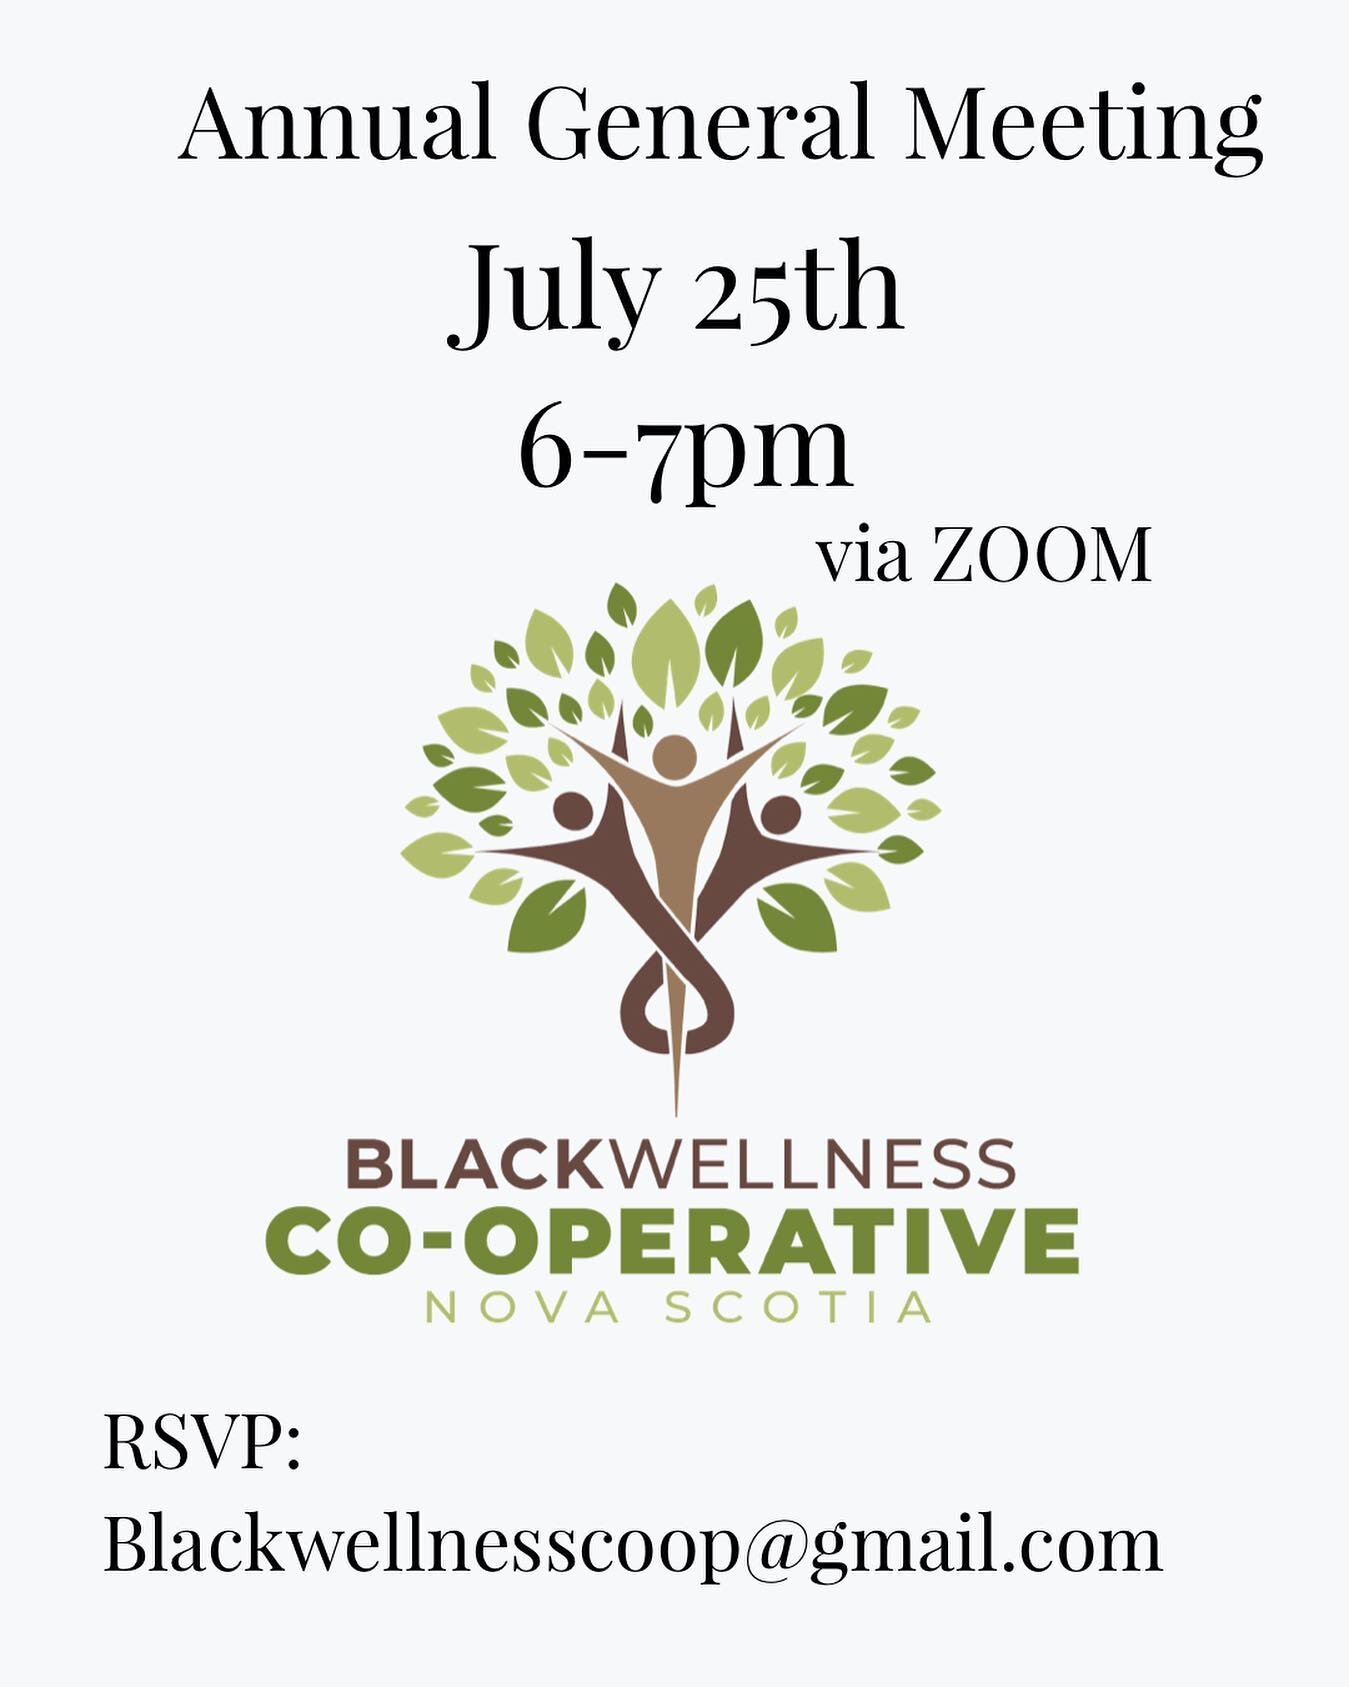 Our second AGM is here and is open to the public! Feel free to join us, Monday July 25th from 6-7pm via zoom. 

As we continue reflect on our past year and continue to grow and expand we would love to see and hear from more of you! 

The meeting will